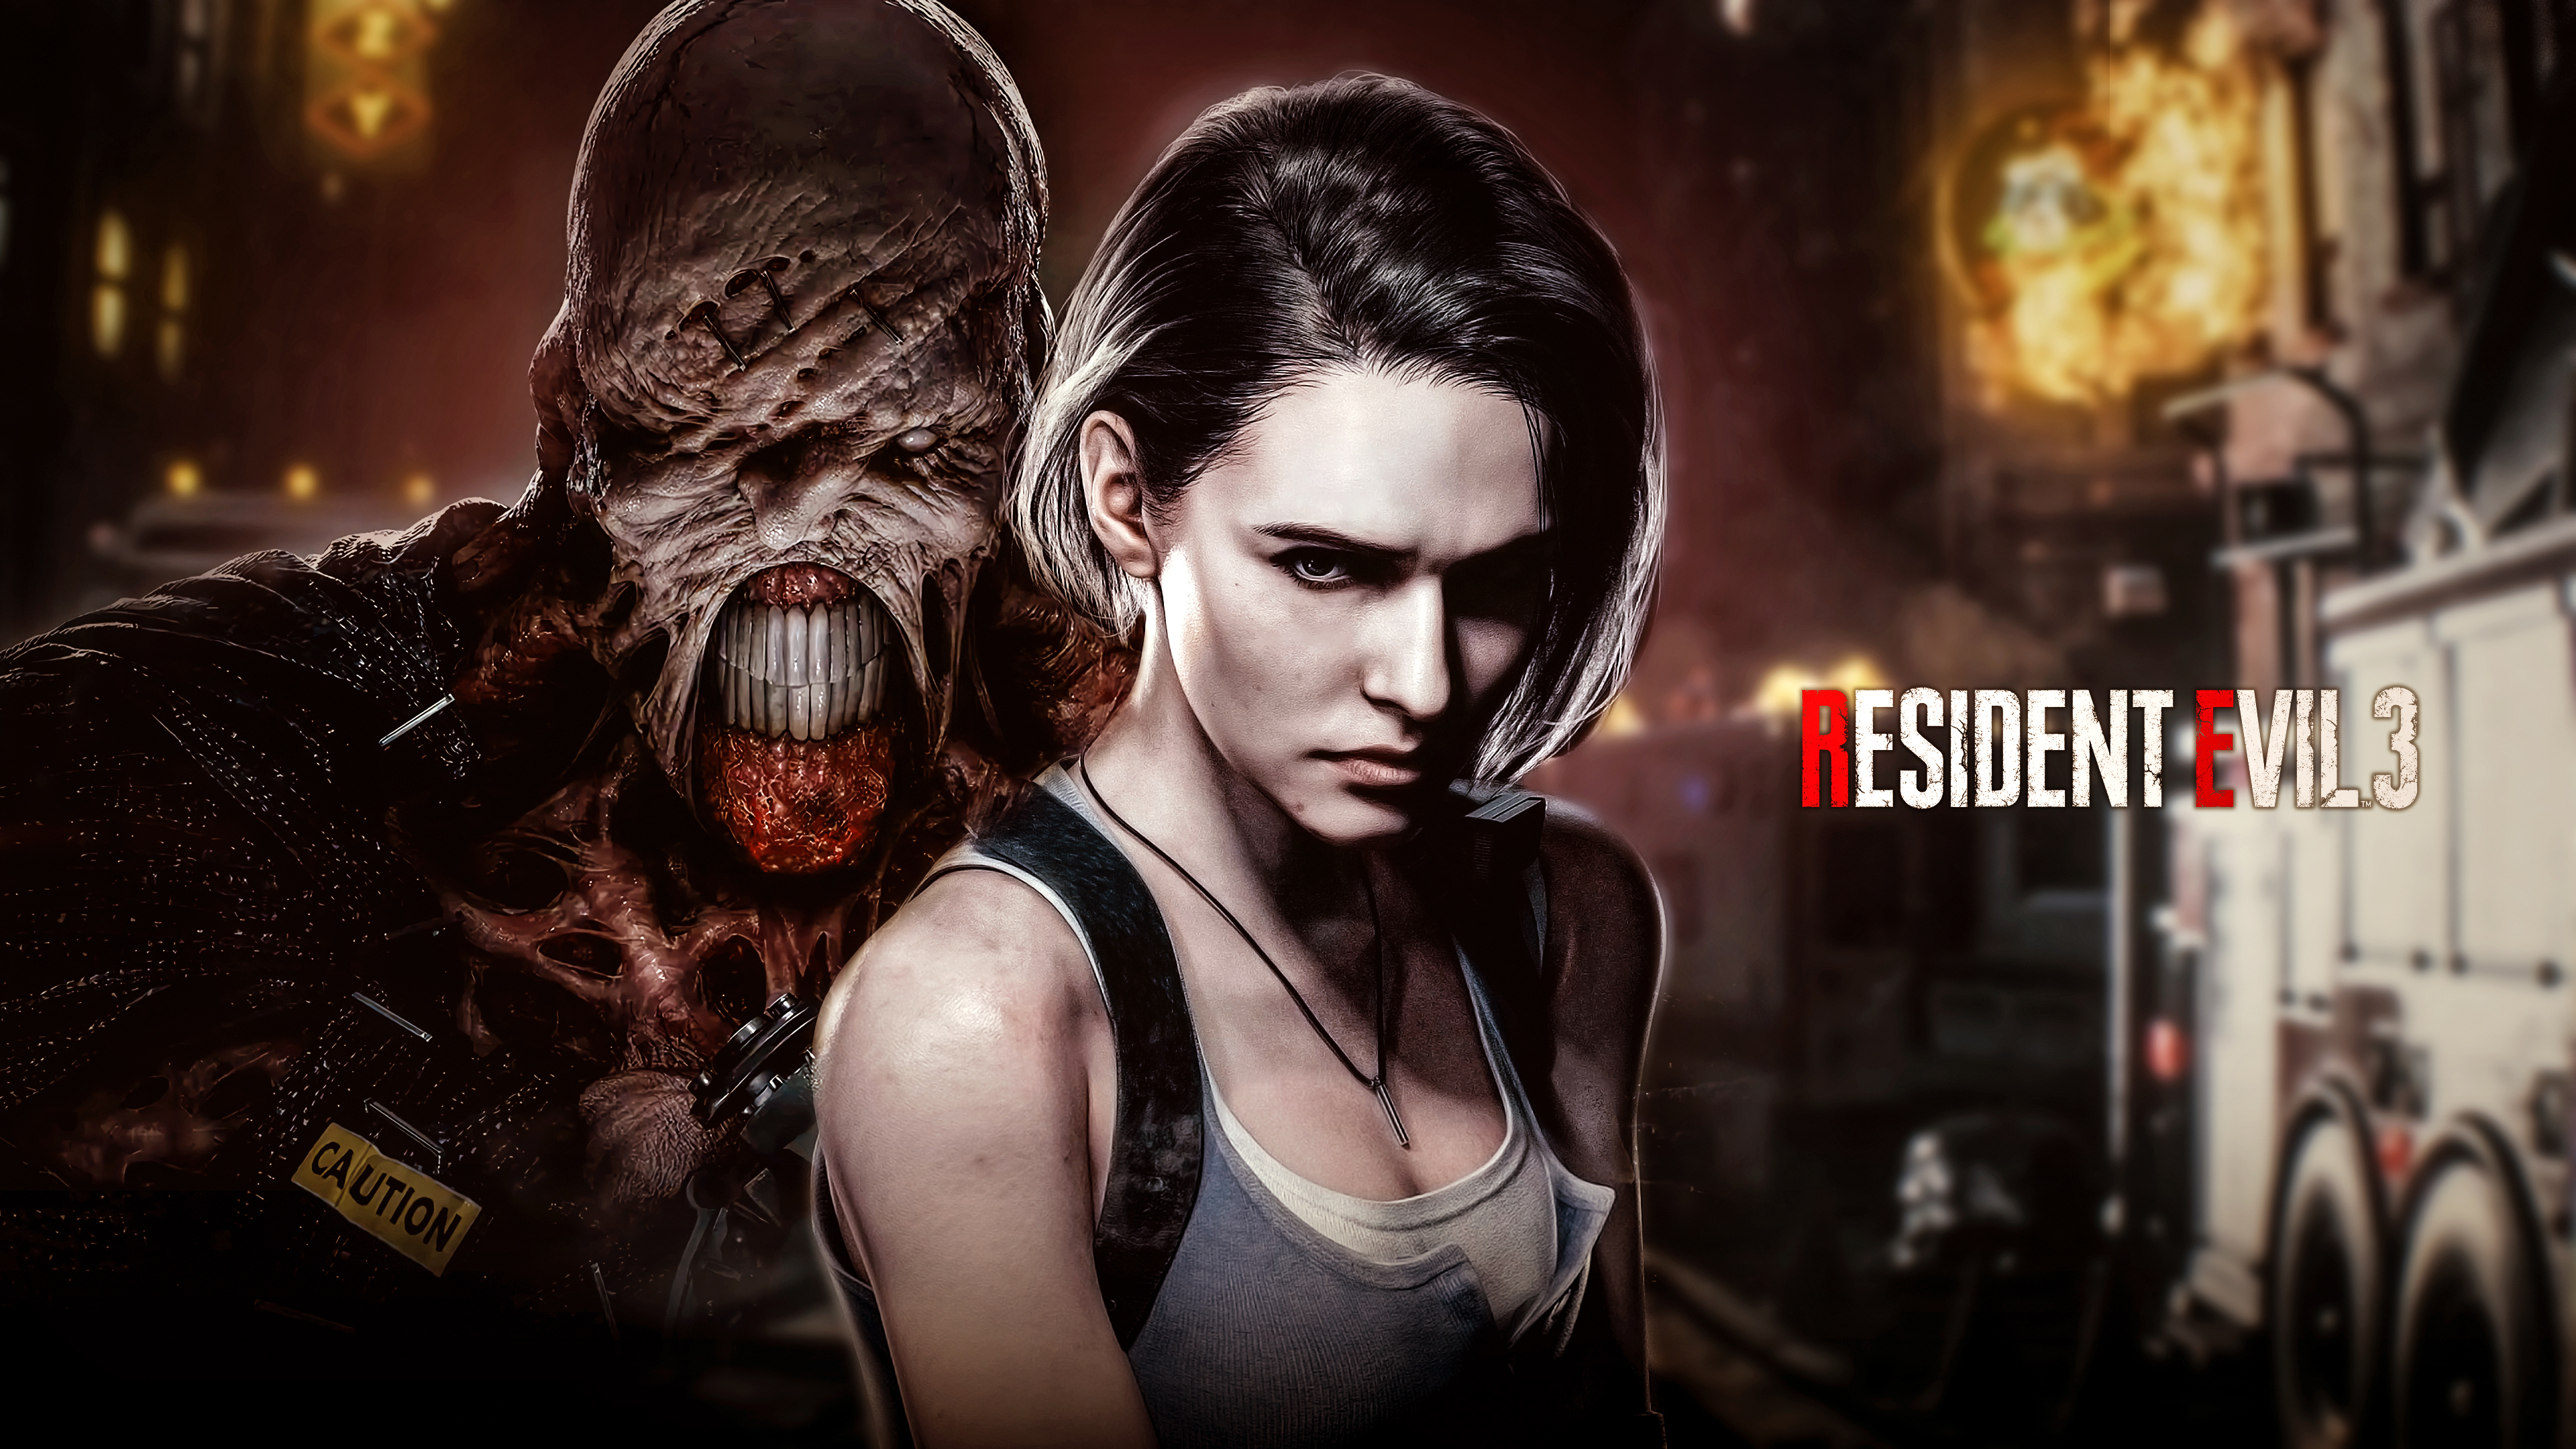 3840x2160 30+ Resident Evil 3 (2020) HD Wallpapers and Backgrounds